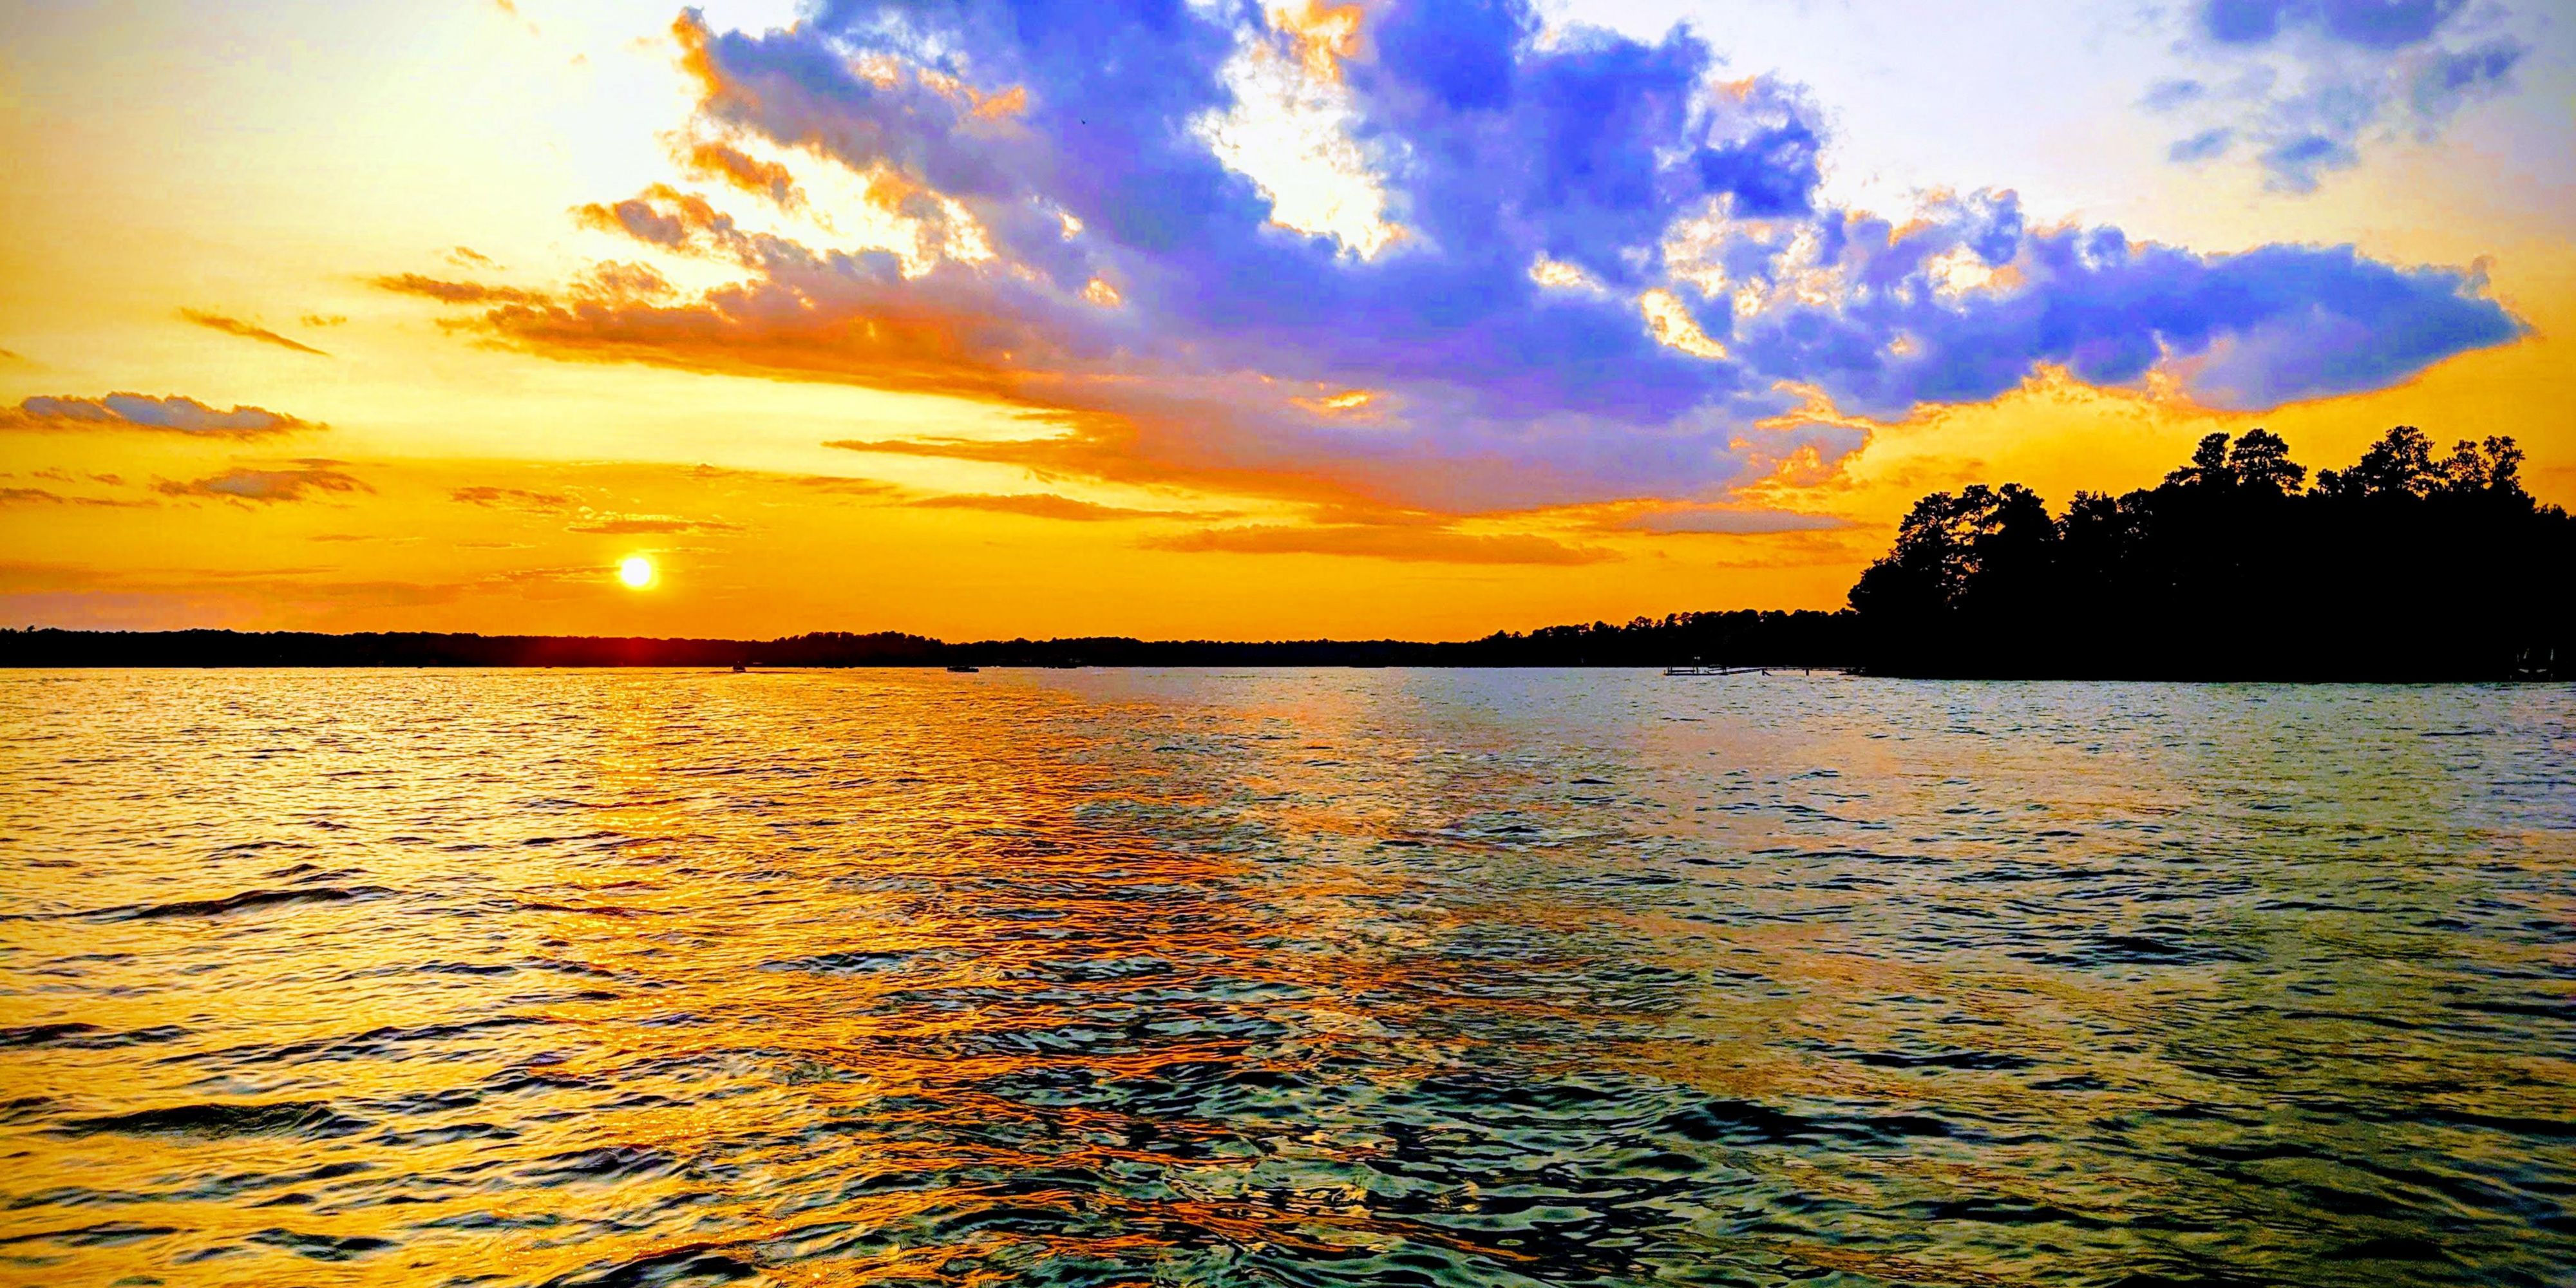 Hotel is 8 miles from Lake Murray, a 50,000 acre man-made lake with 650 miles of shoreline.  Known for its striped bass fishing and summer water sports, Lake Murray draws in locals and visitors alike. Rent a canoe, boat, or take in the public parks.  The sunsets are not to miss!